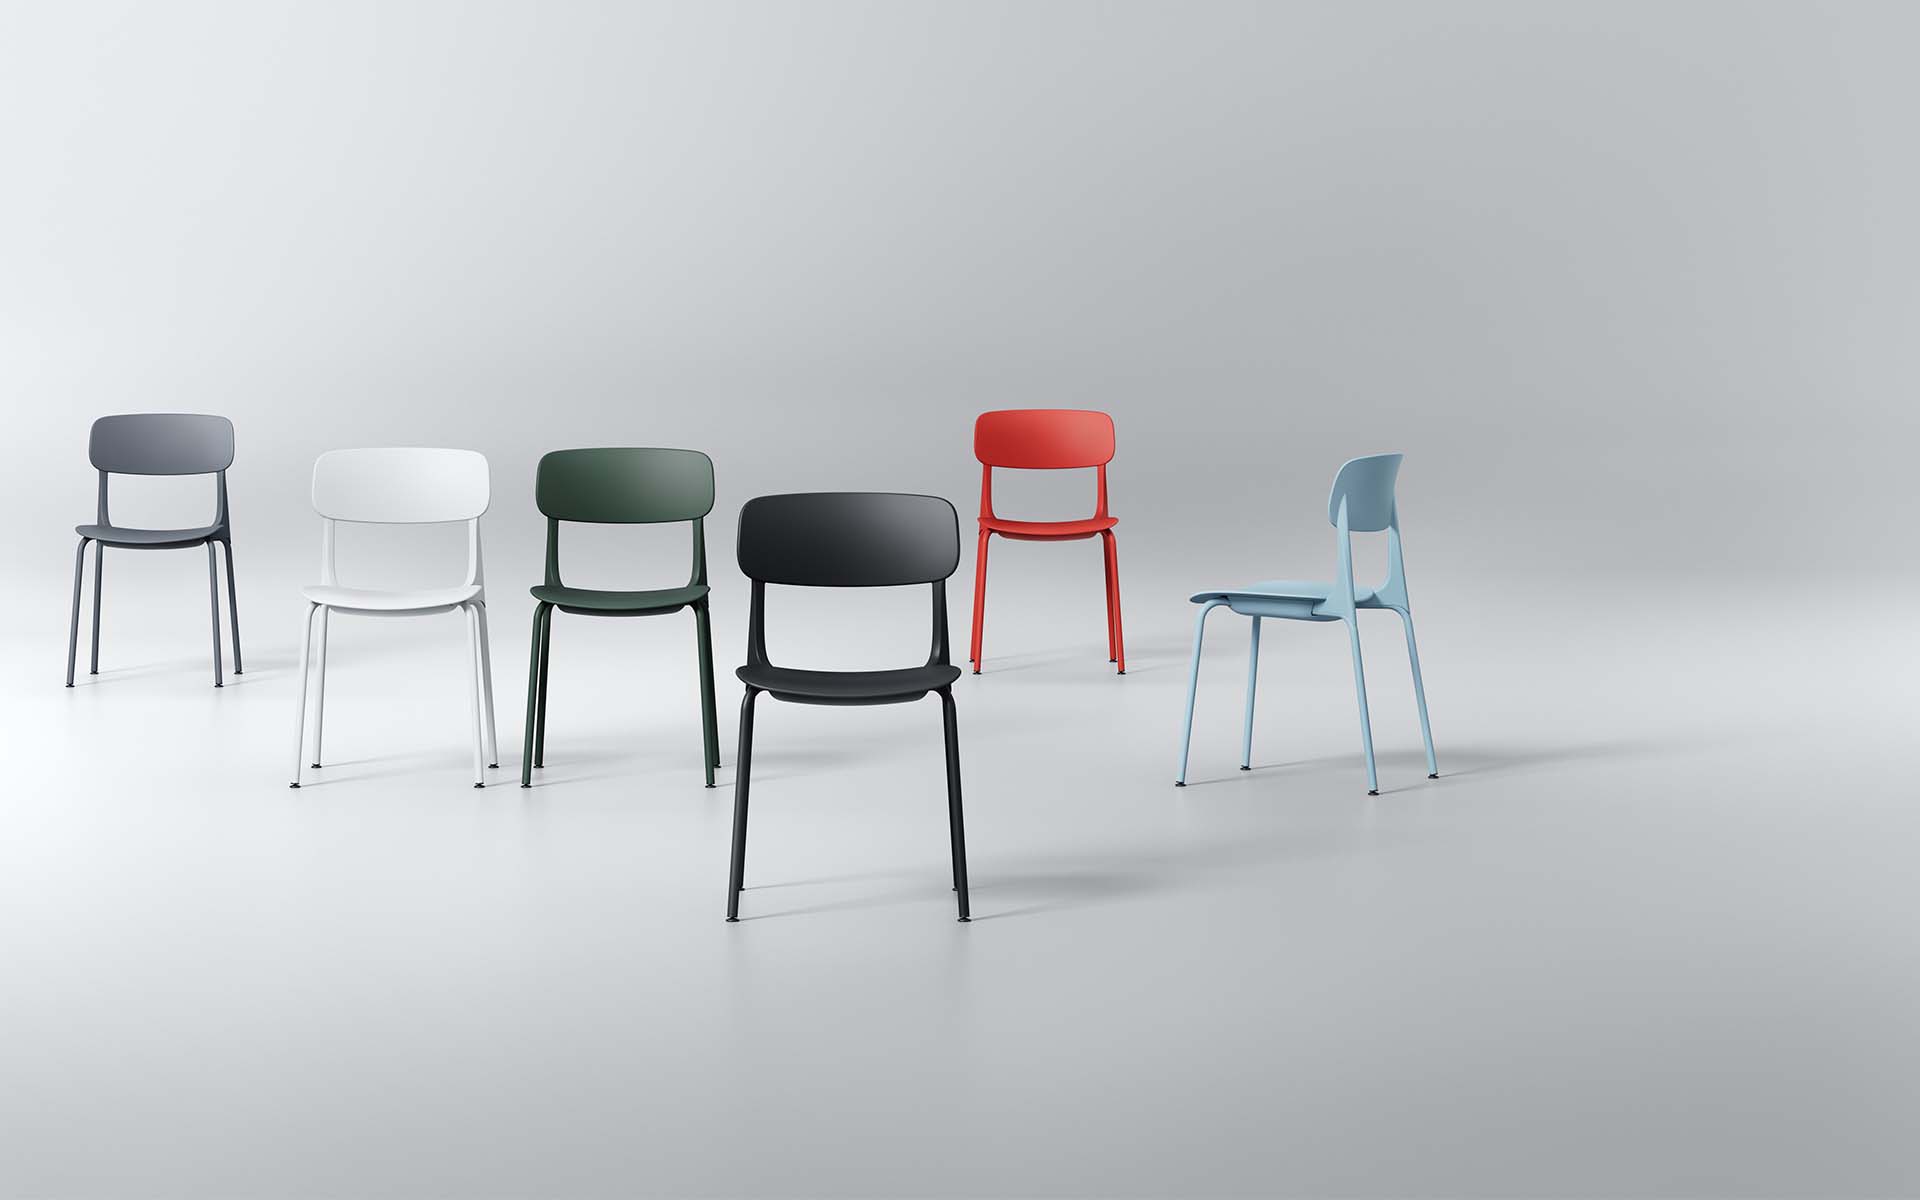 Six Okamura Ena visitor chairs by ITO Design in various colors (dark grey, neo white, dark green, black, orange red and sage)